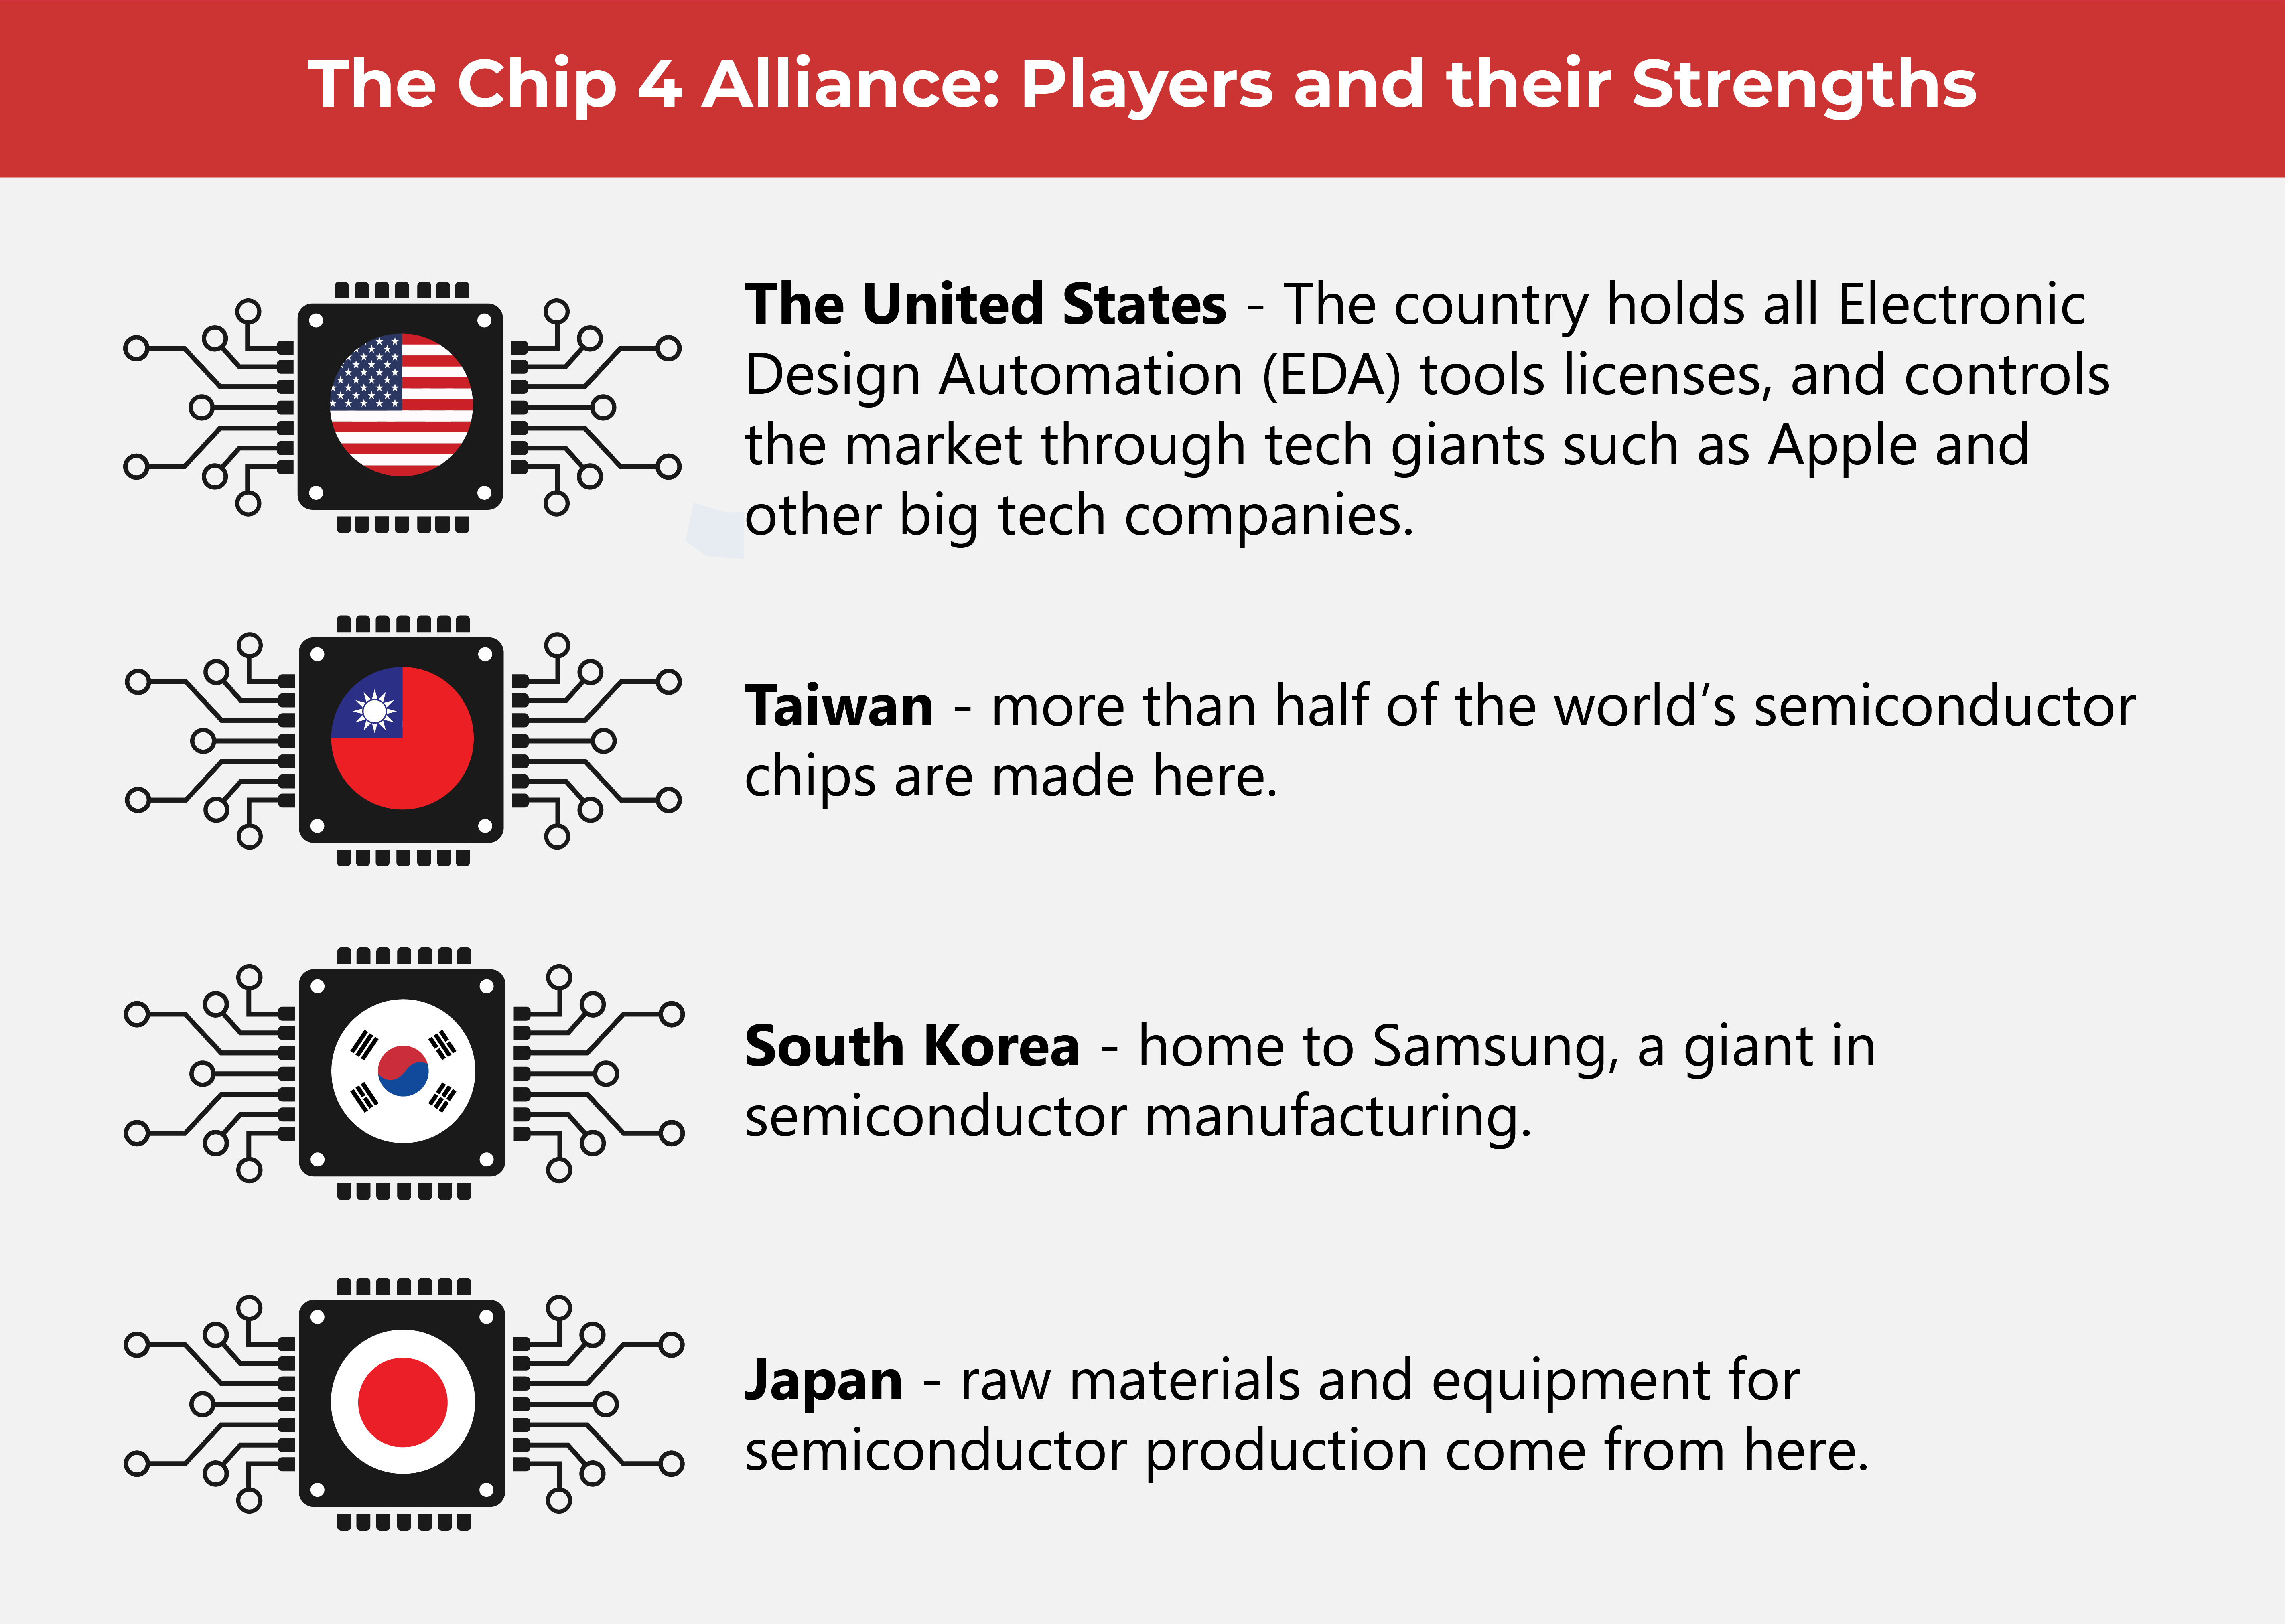 Better Together? The Chip 4 Alliance (67)